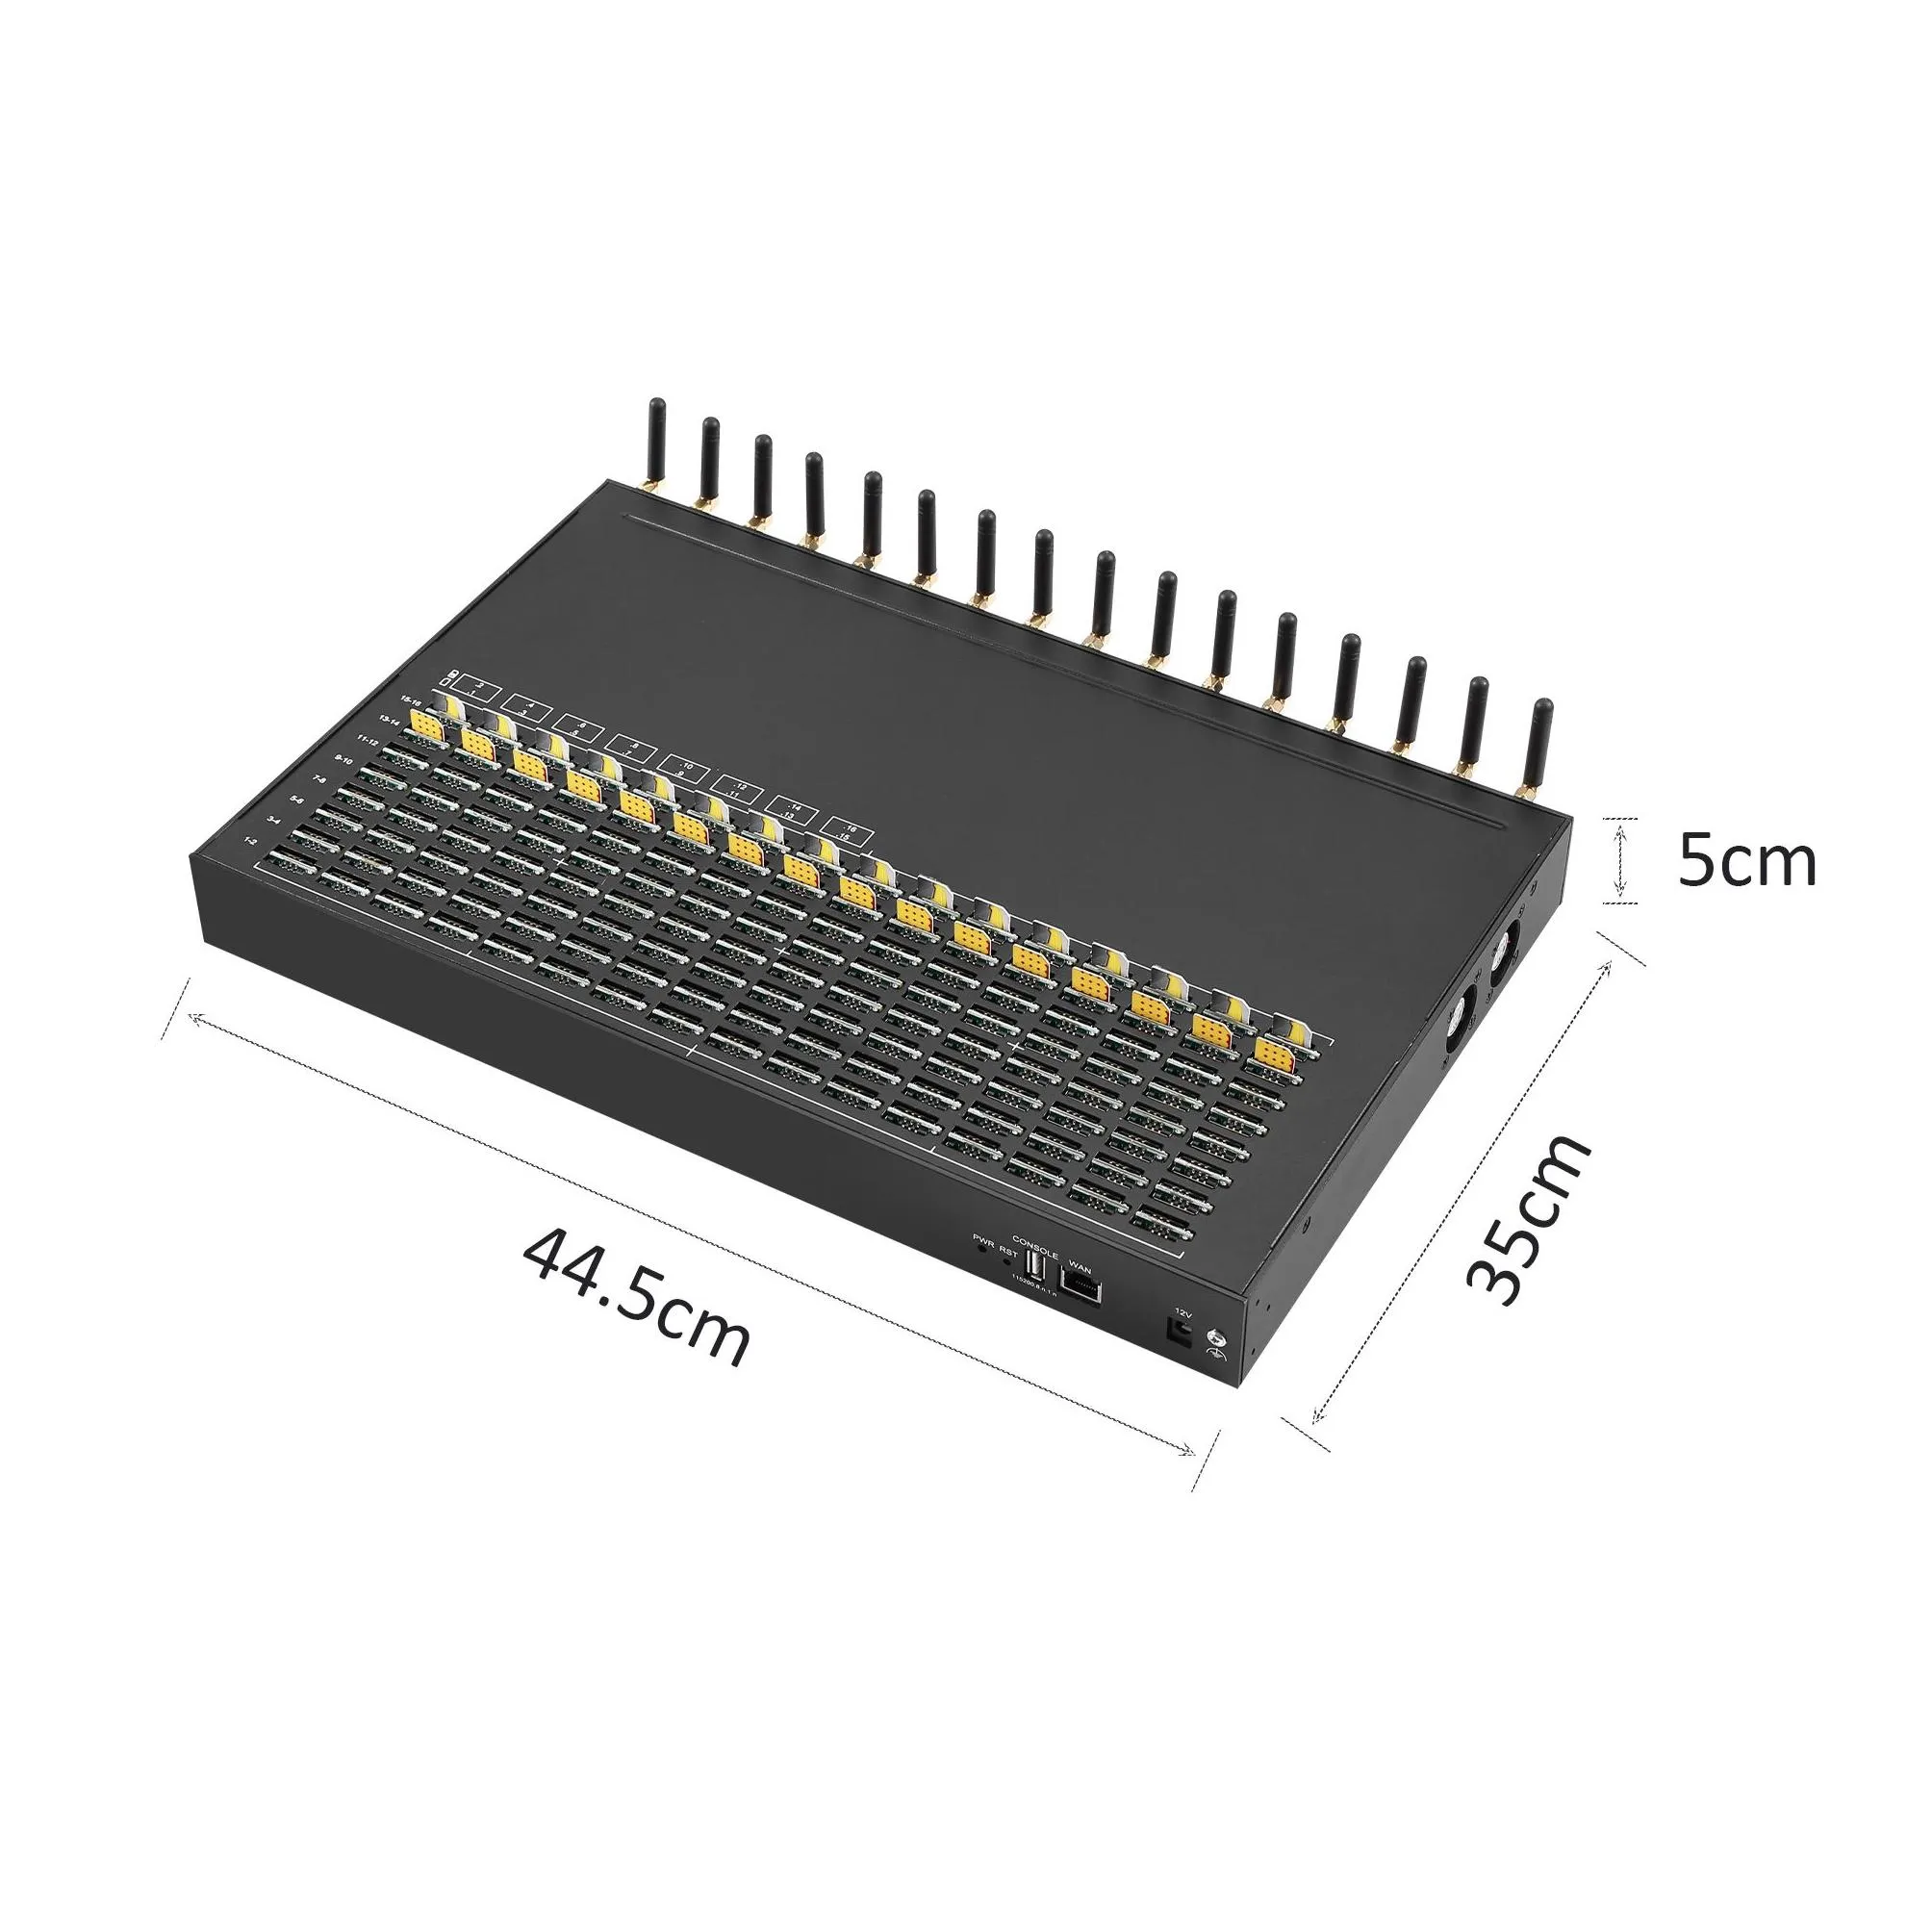 4G Lte 16 Antenna Channel 256 sims slots High Gain Signal Wireless Modem Support SMPP Http API Data Analysis And SMS Notification